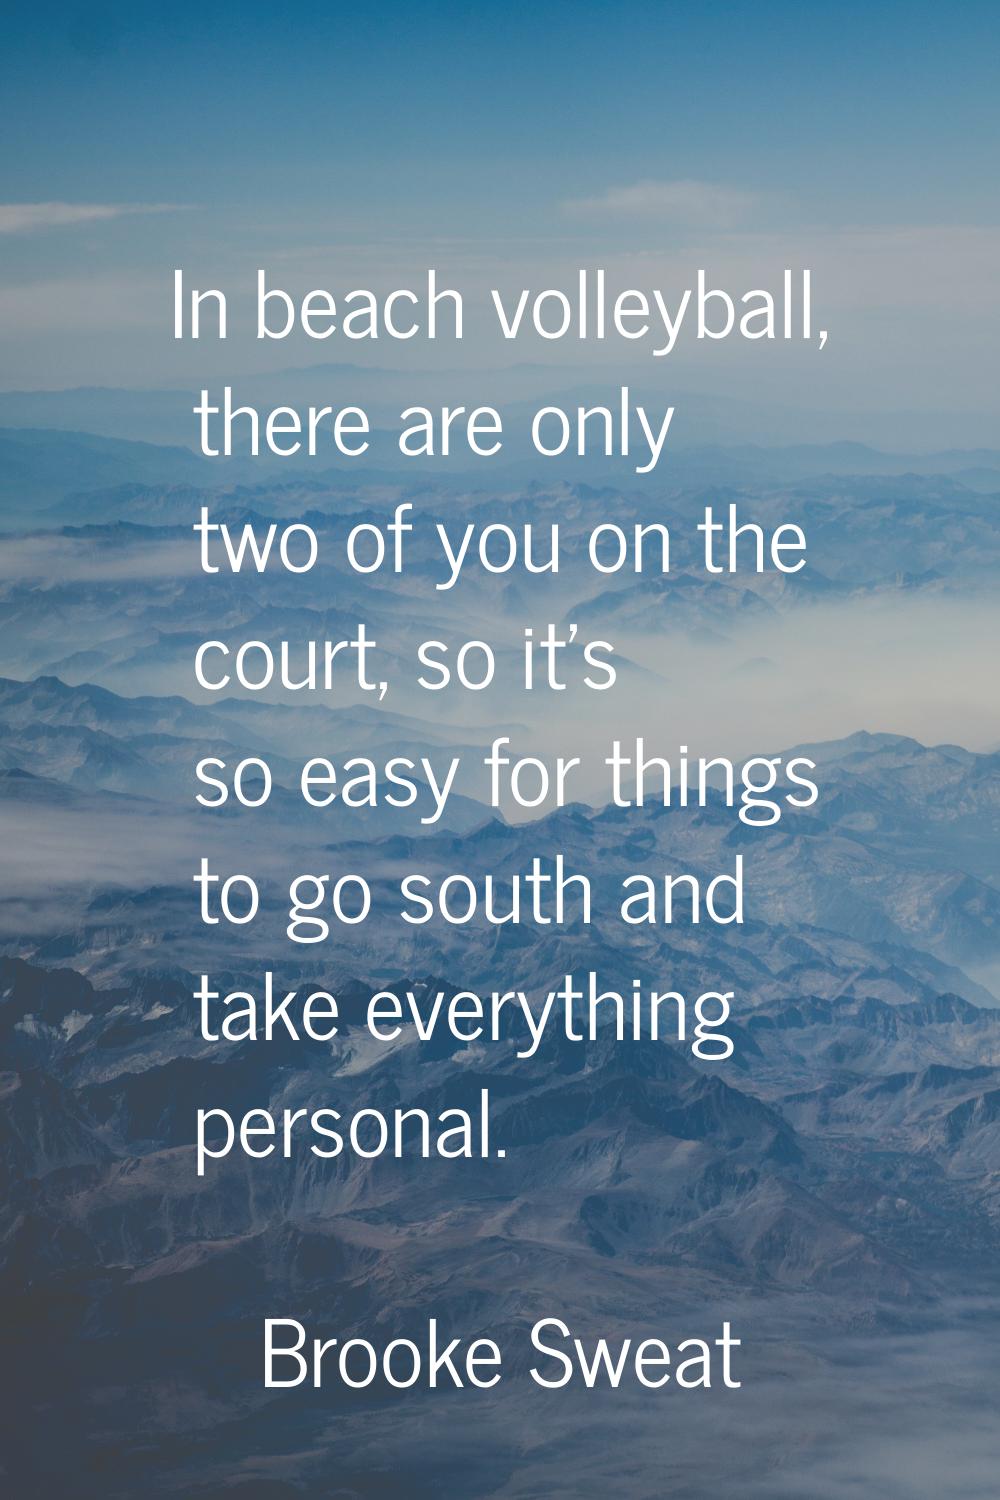 In beach volleyball, there are only two of you on the court, so it's so easy for things to go south